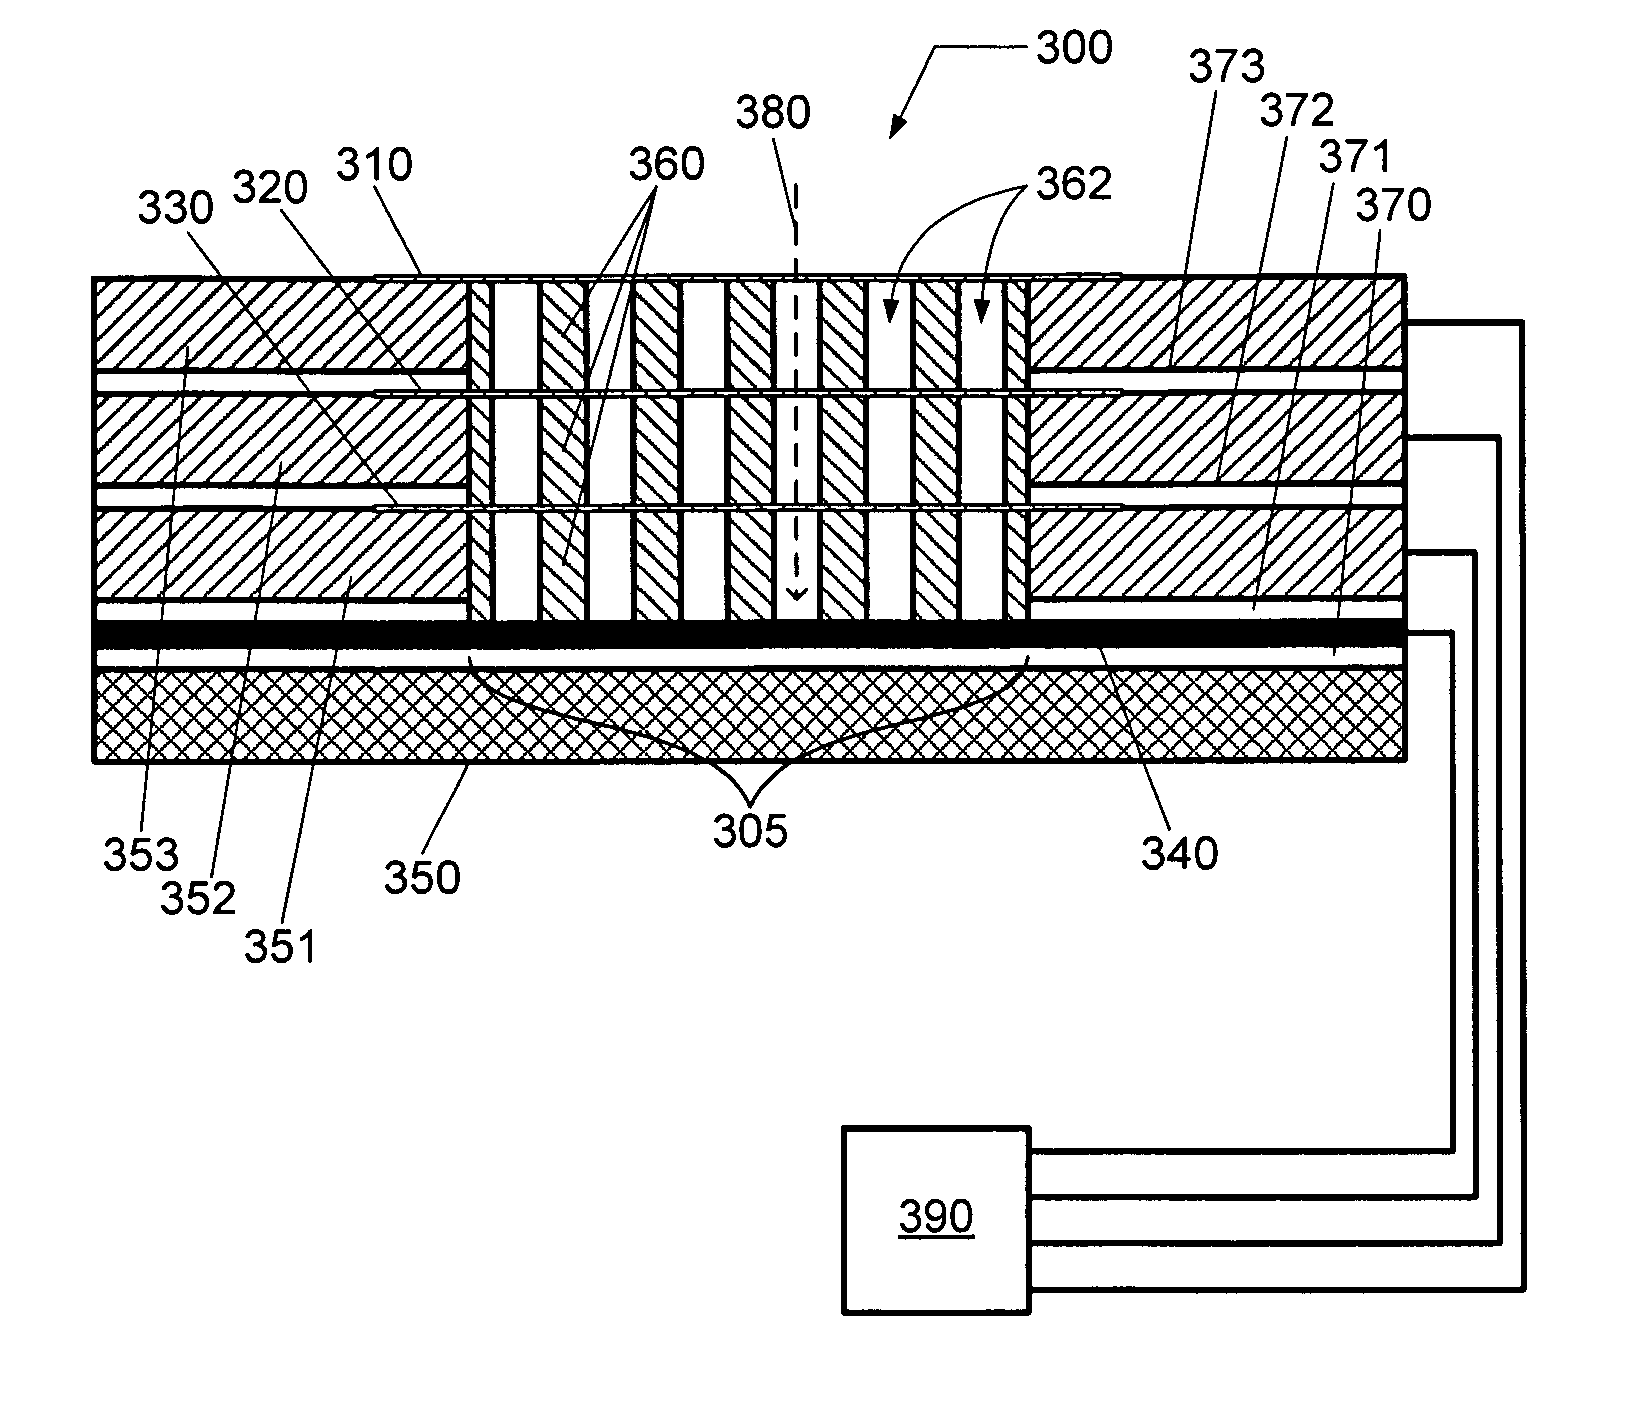 Two-grid ion energy analyzer and methods of manufacturing and operating